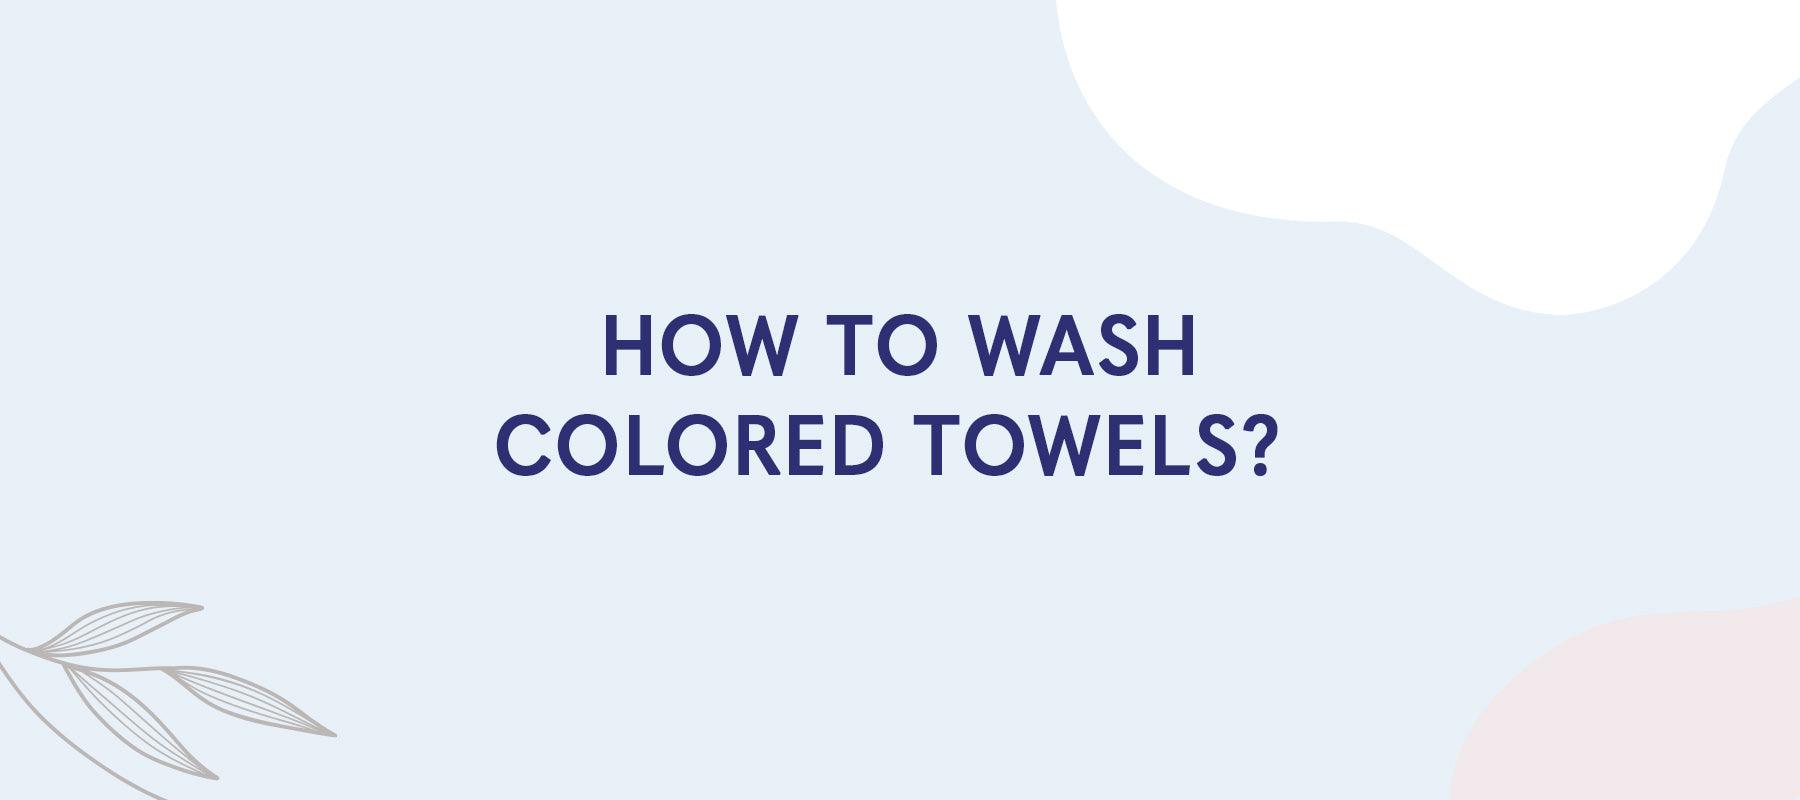 How to Wash Colored Towels? - American Soft Linen